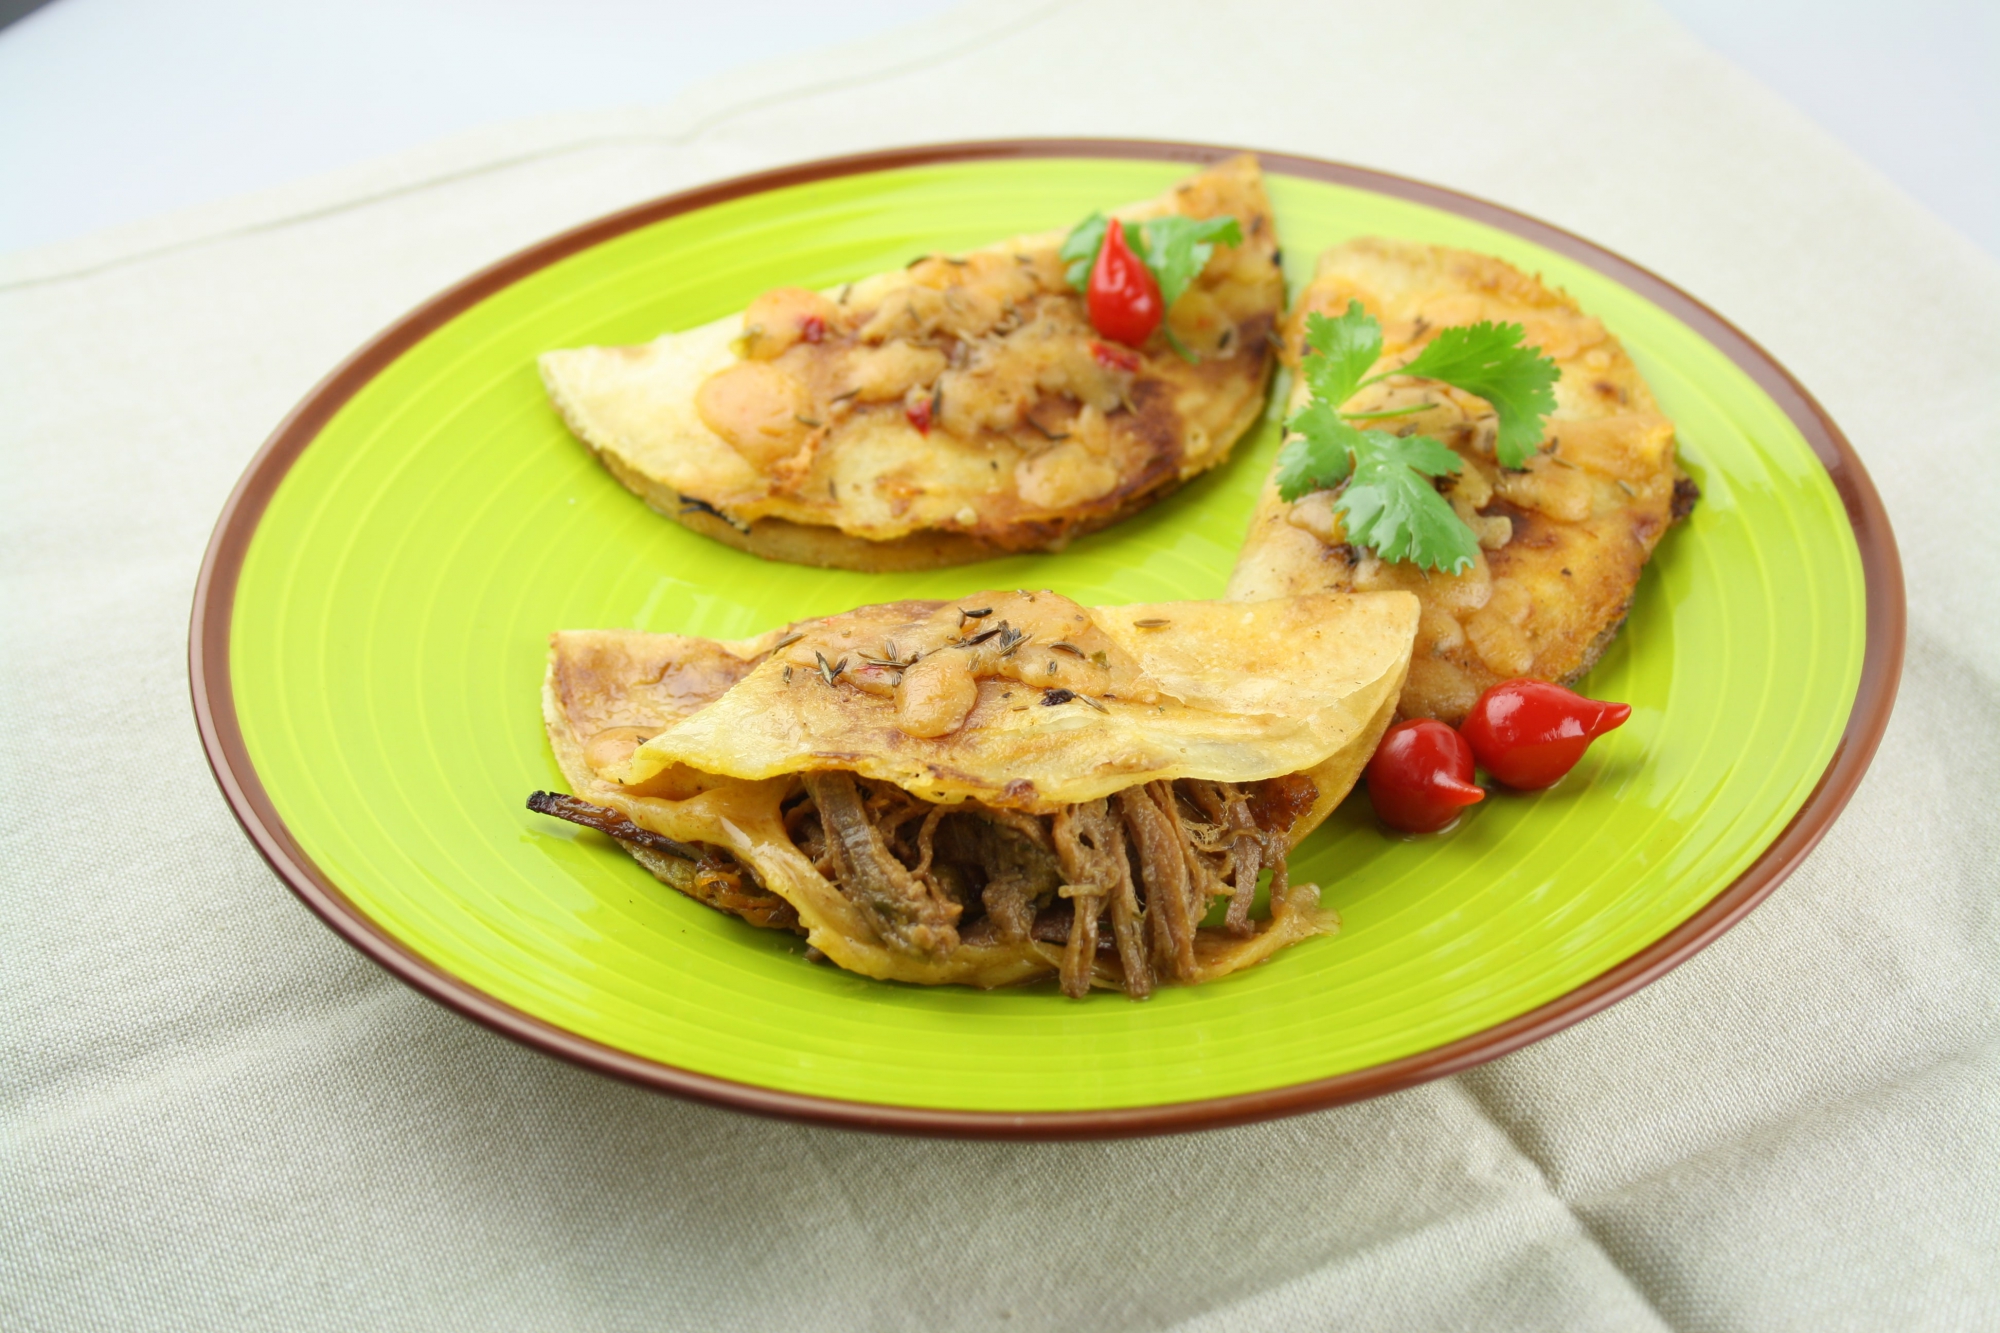 Quesadilla with confit duck - 